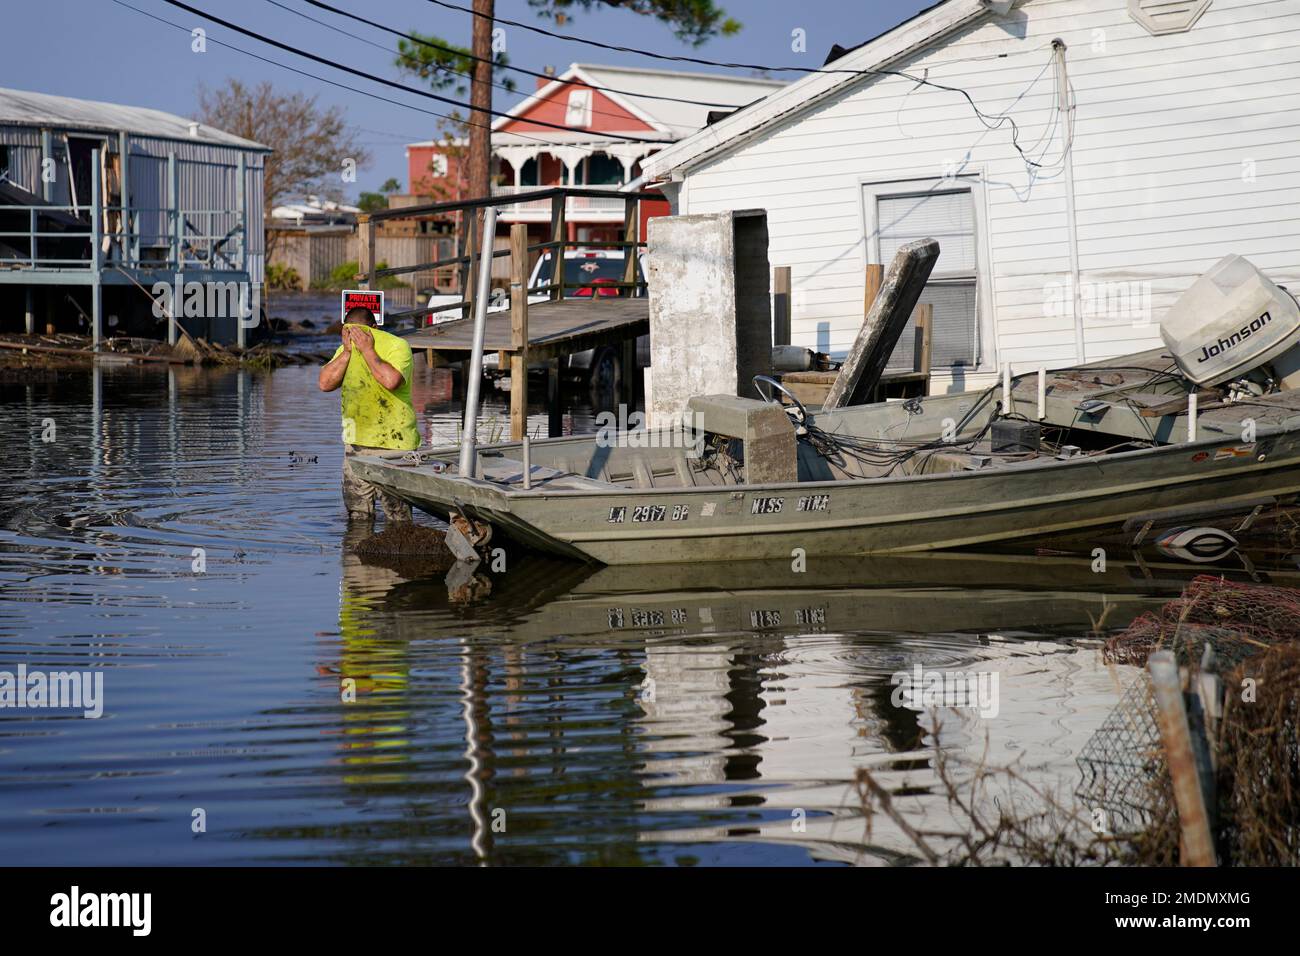 Nathan Fabre wipes sweat from his face while checking on his home and boat  in the aftermath of Hurricane Ida, Sunday, Sept. 5, 2021, in Lafitte, La.  "We lost everything," said Fabre